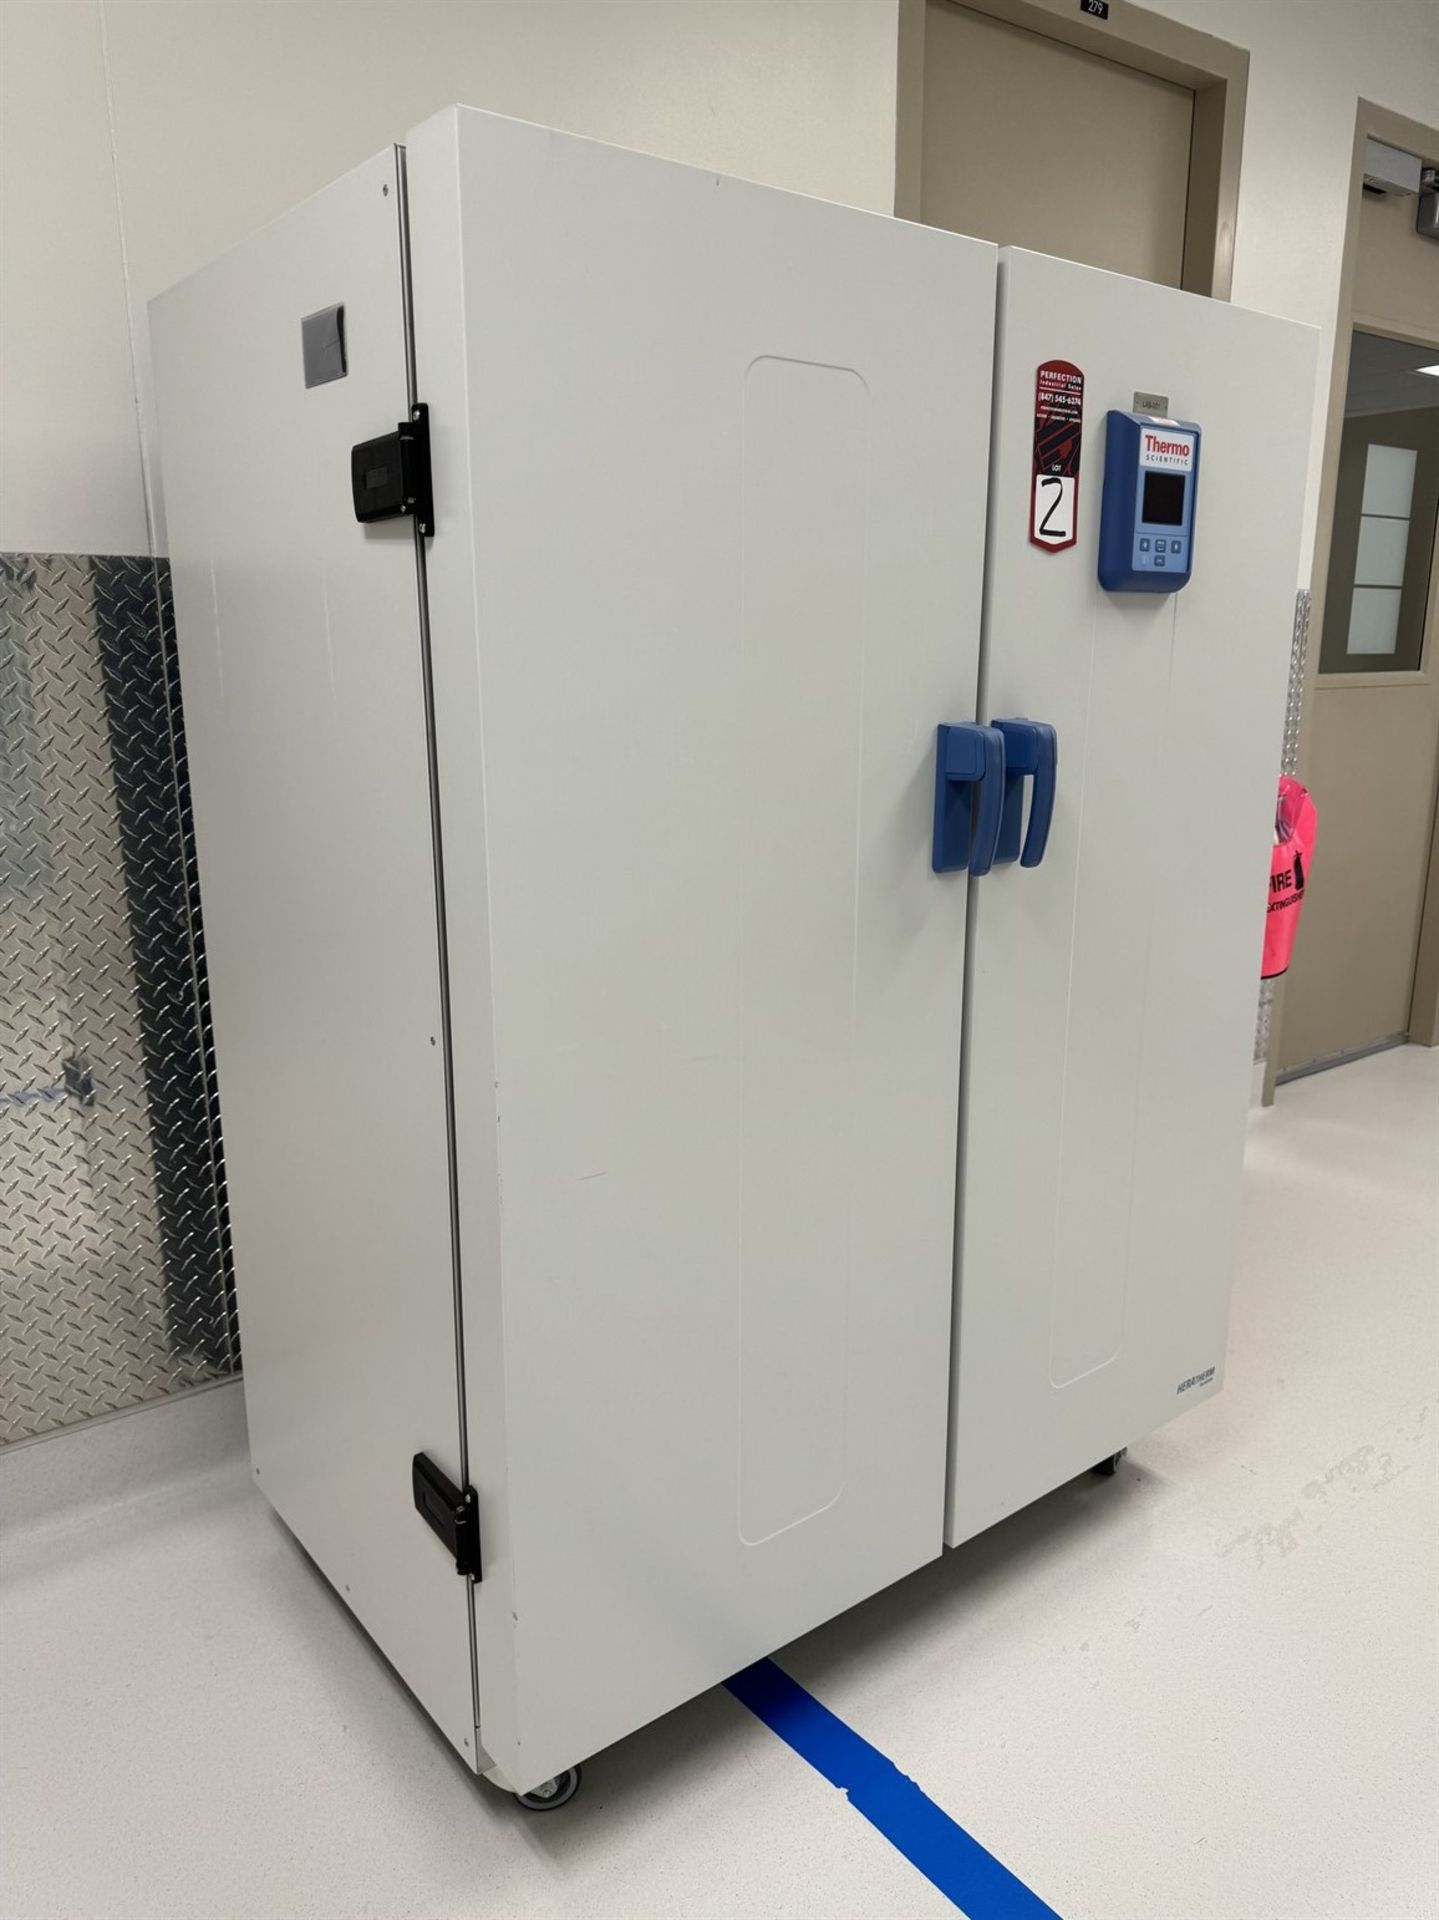 2014 THERMO SCIENTIFIC Heratherm IGS750 Incubator, s/n 41623840 - Image 3 of 8